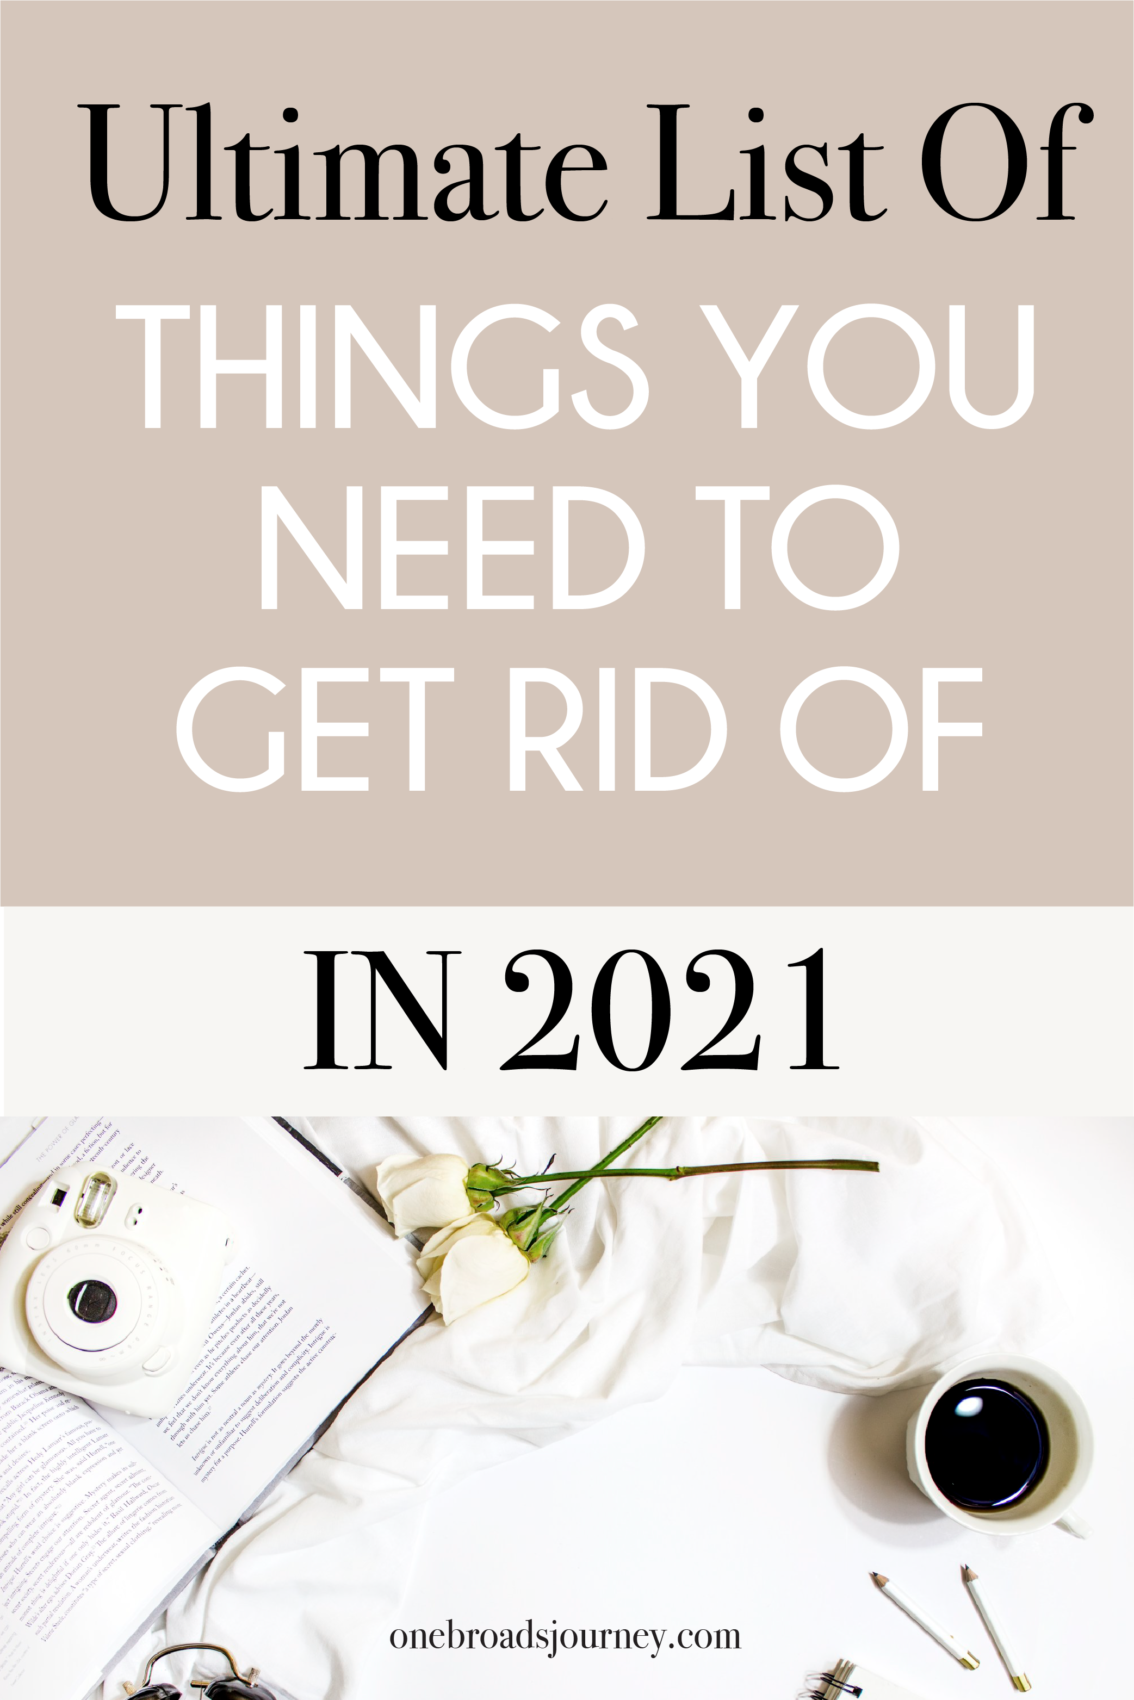 ULTIMATE LIST OF THINGS TO GET RID OF IN 2021 | DECLUTTER FOR THE NEW YEAR